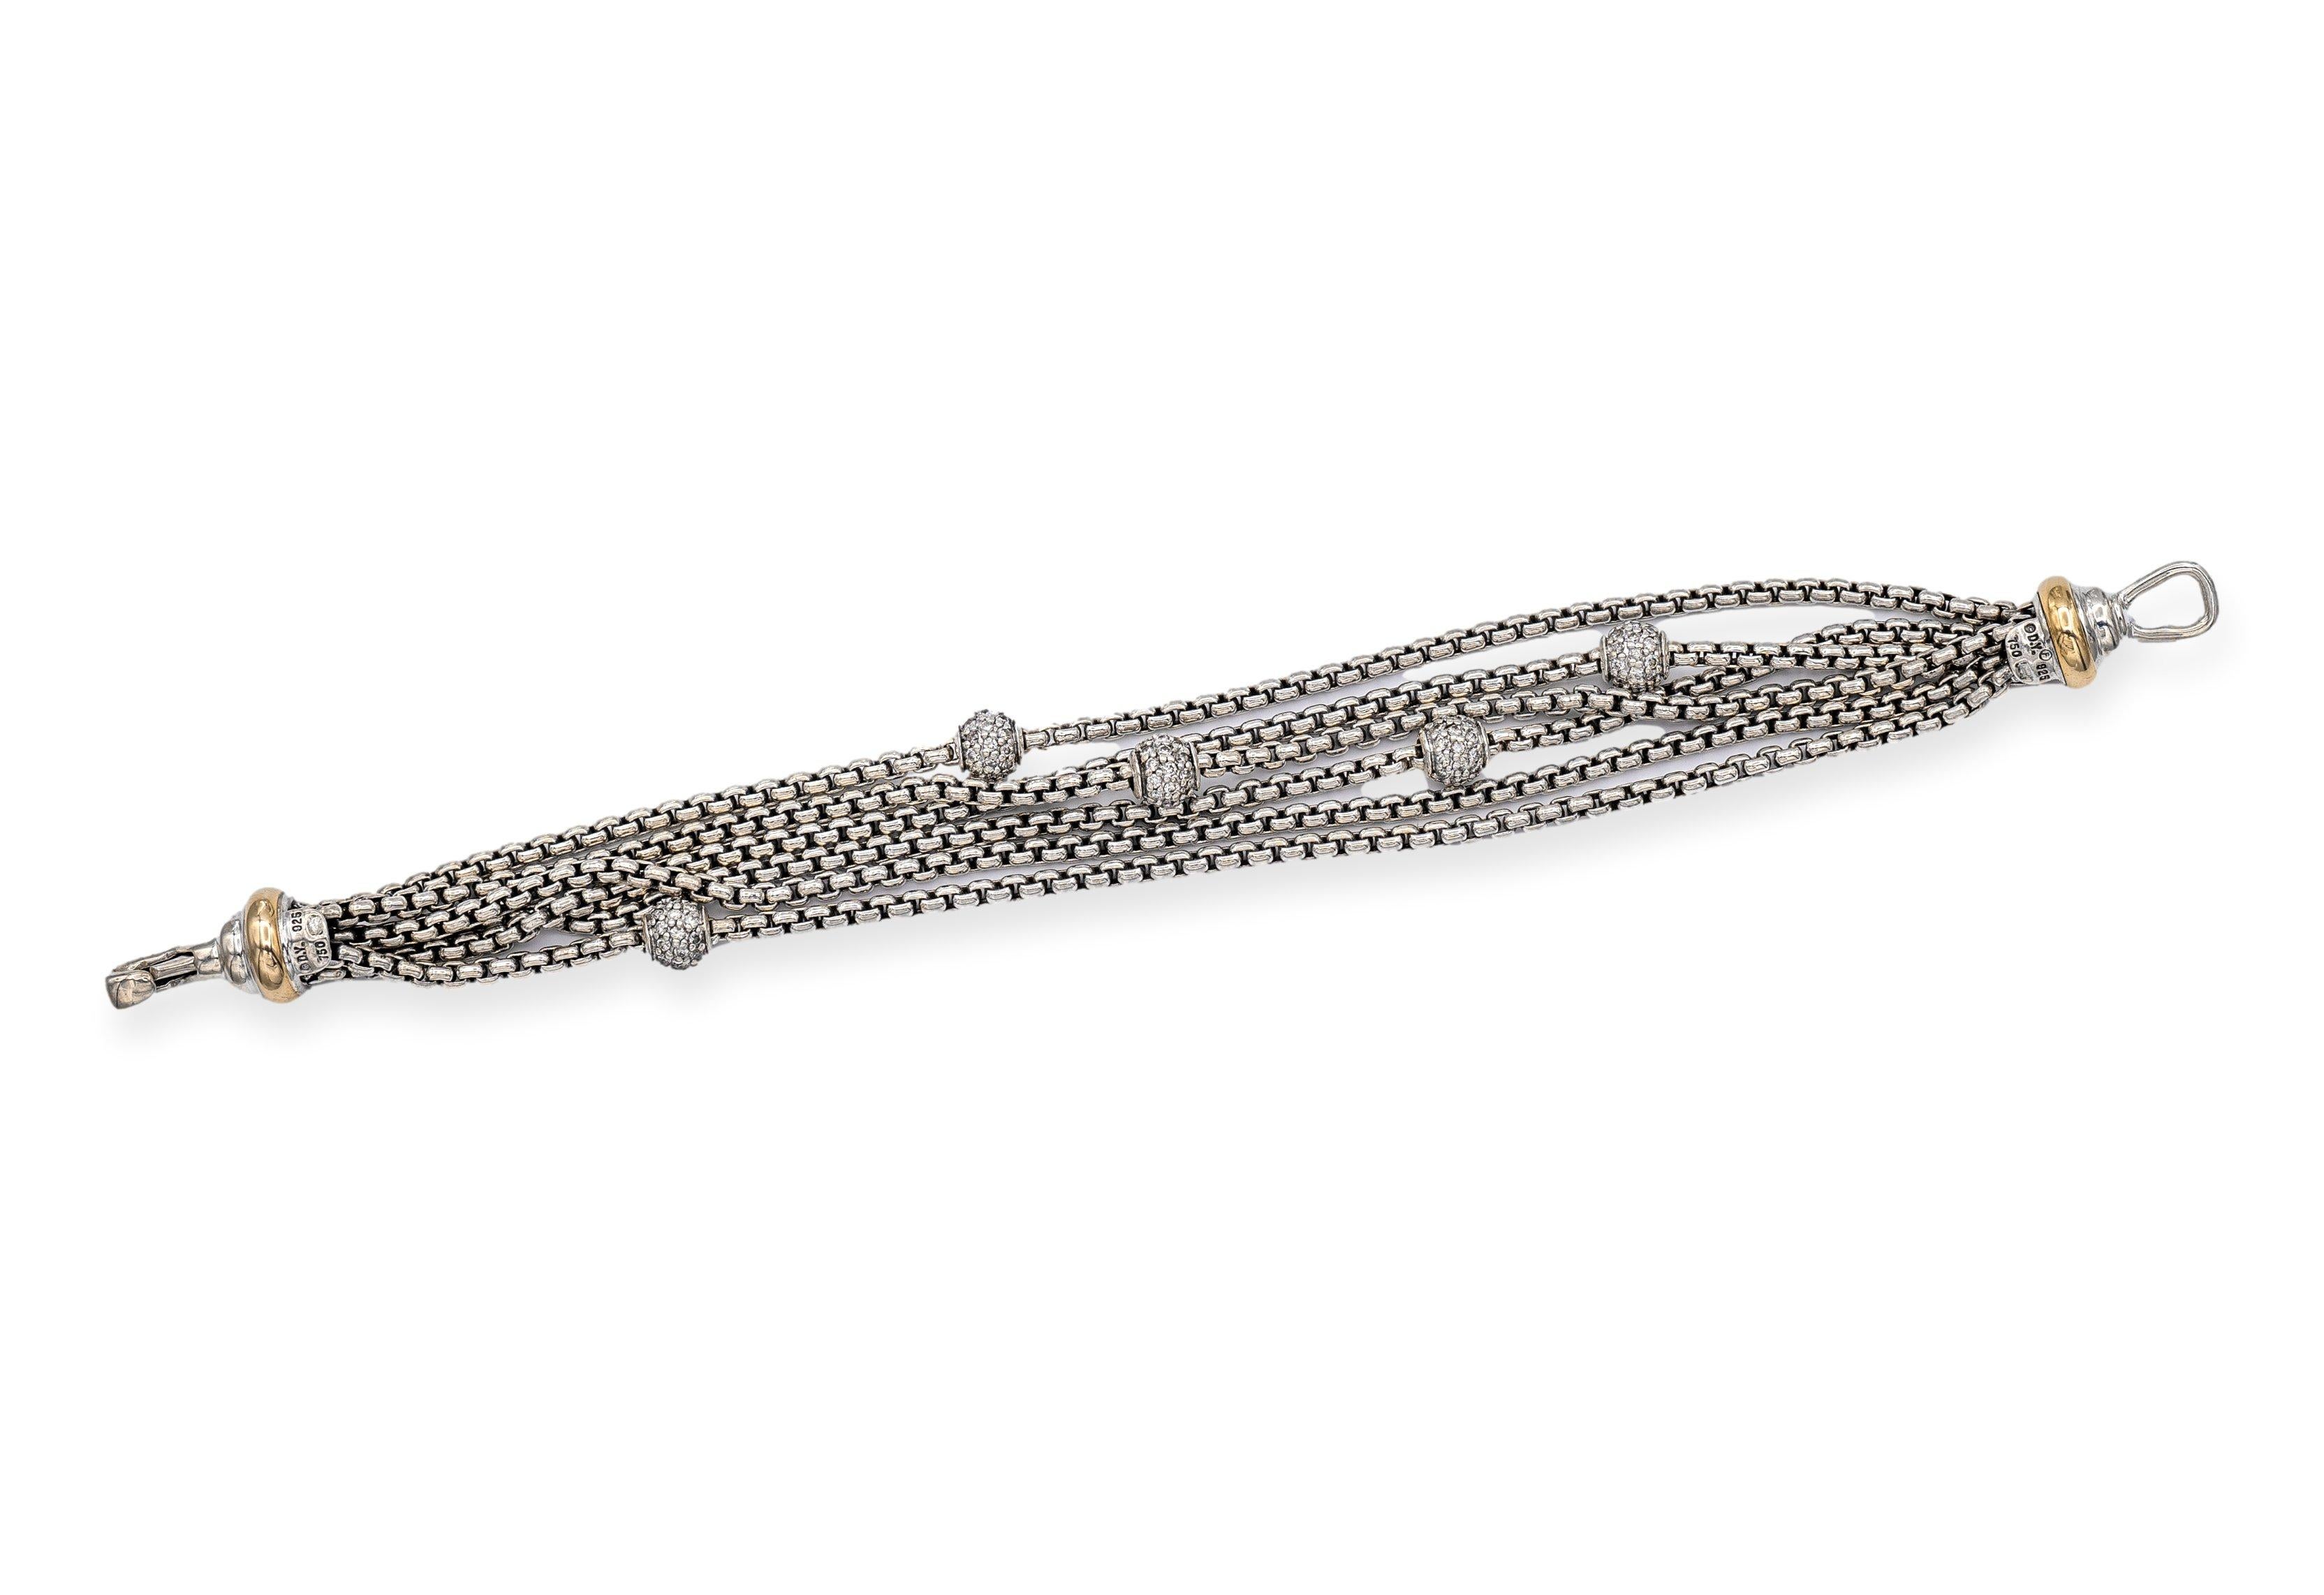 David Yurman bracelet finely crafted in sterling silver featuring 6 strands of the DY signature link chain accented by 5 pave bead set diamond ball stations weighing 0.80 carats total weight approximately. Bracelet measures 6.5 inches long with a